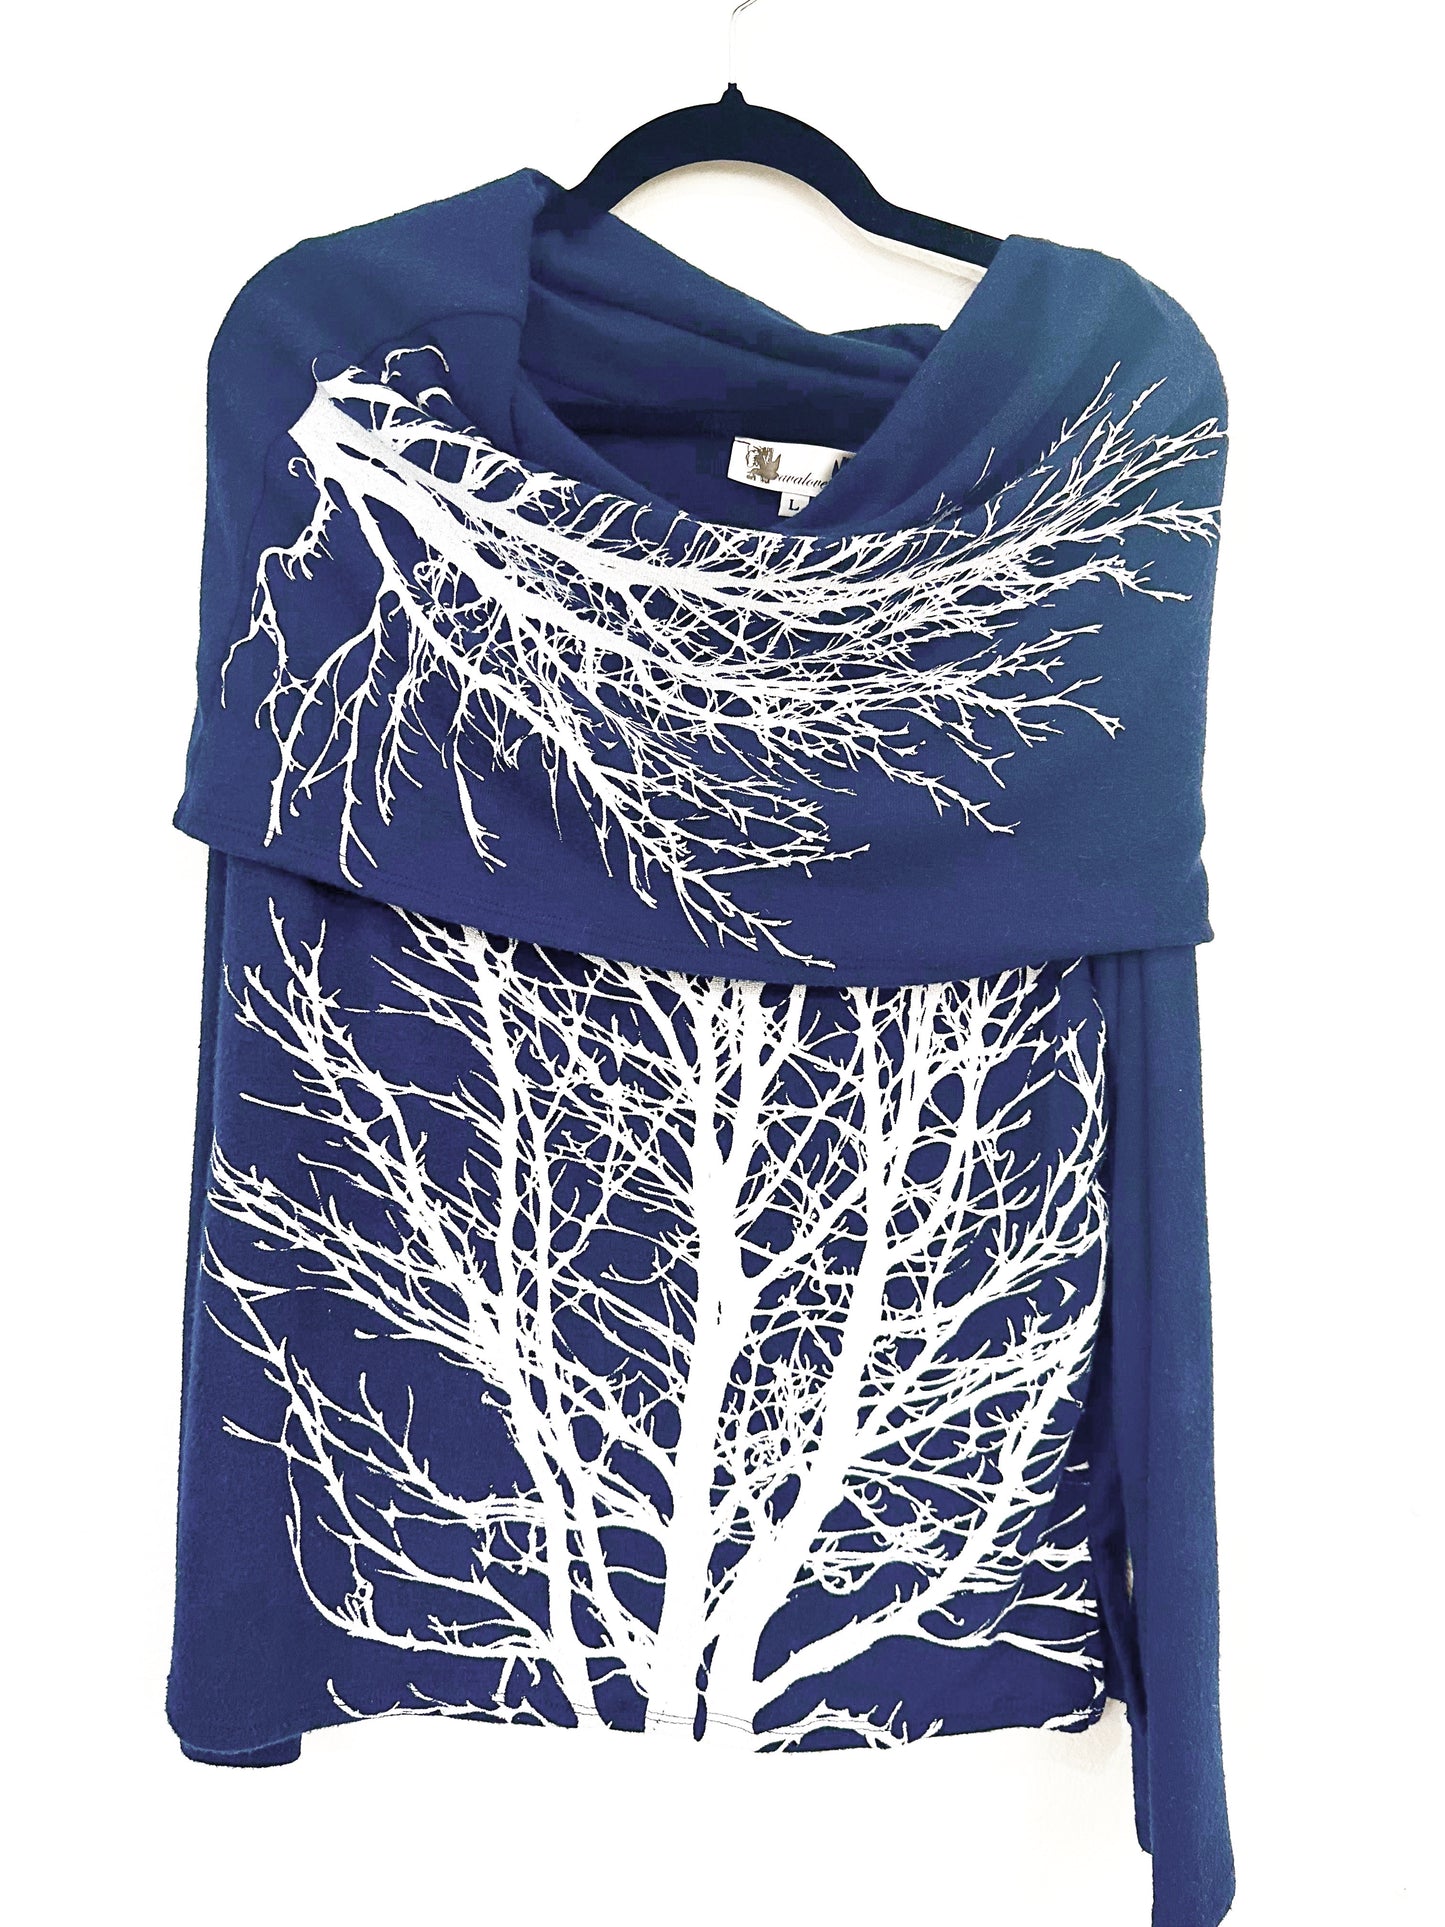 Tree Amulet Cowl- Big Branch Cowl Neck Sweater-Navy Limited Edition